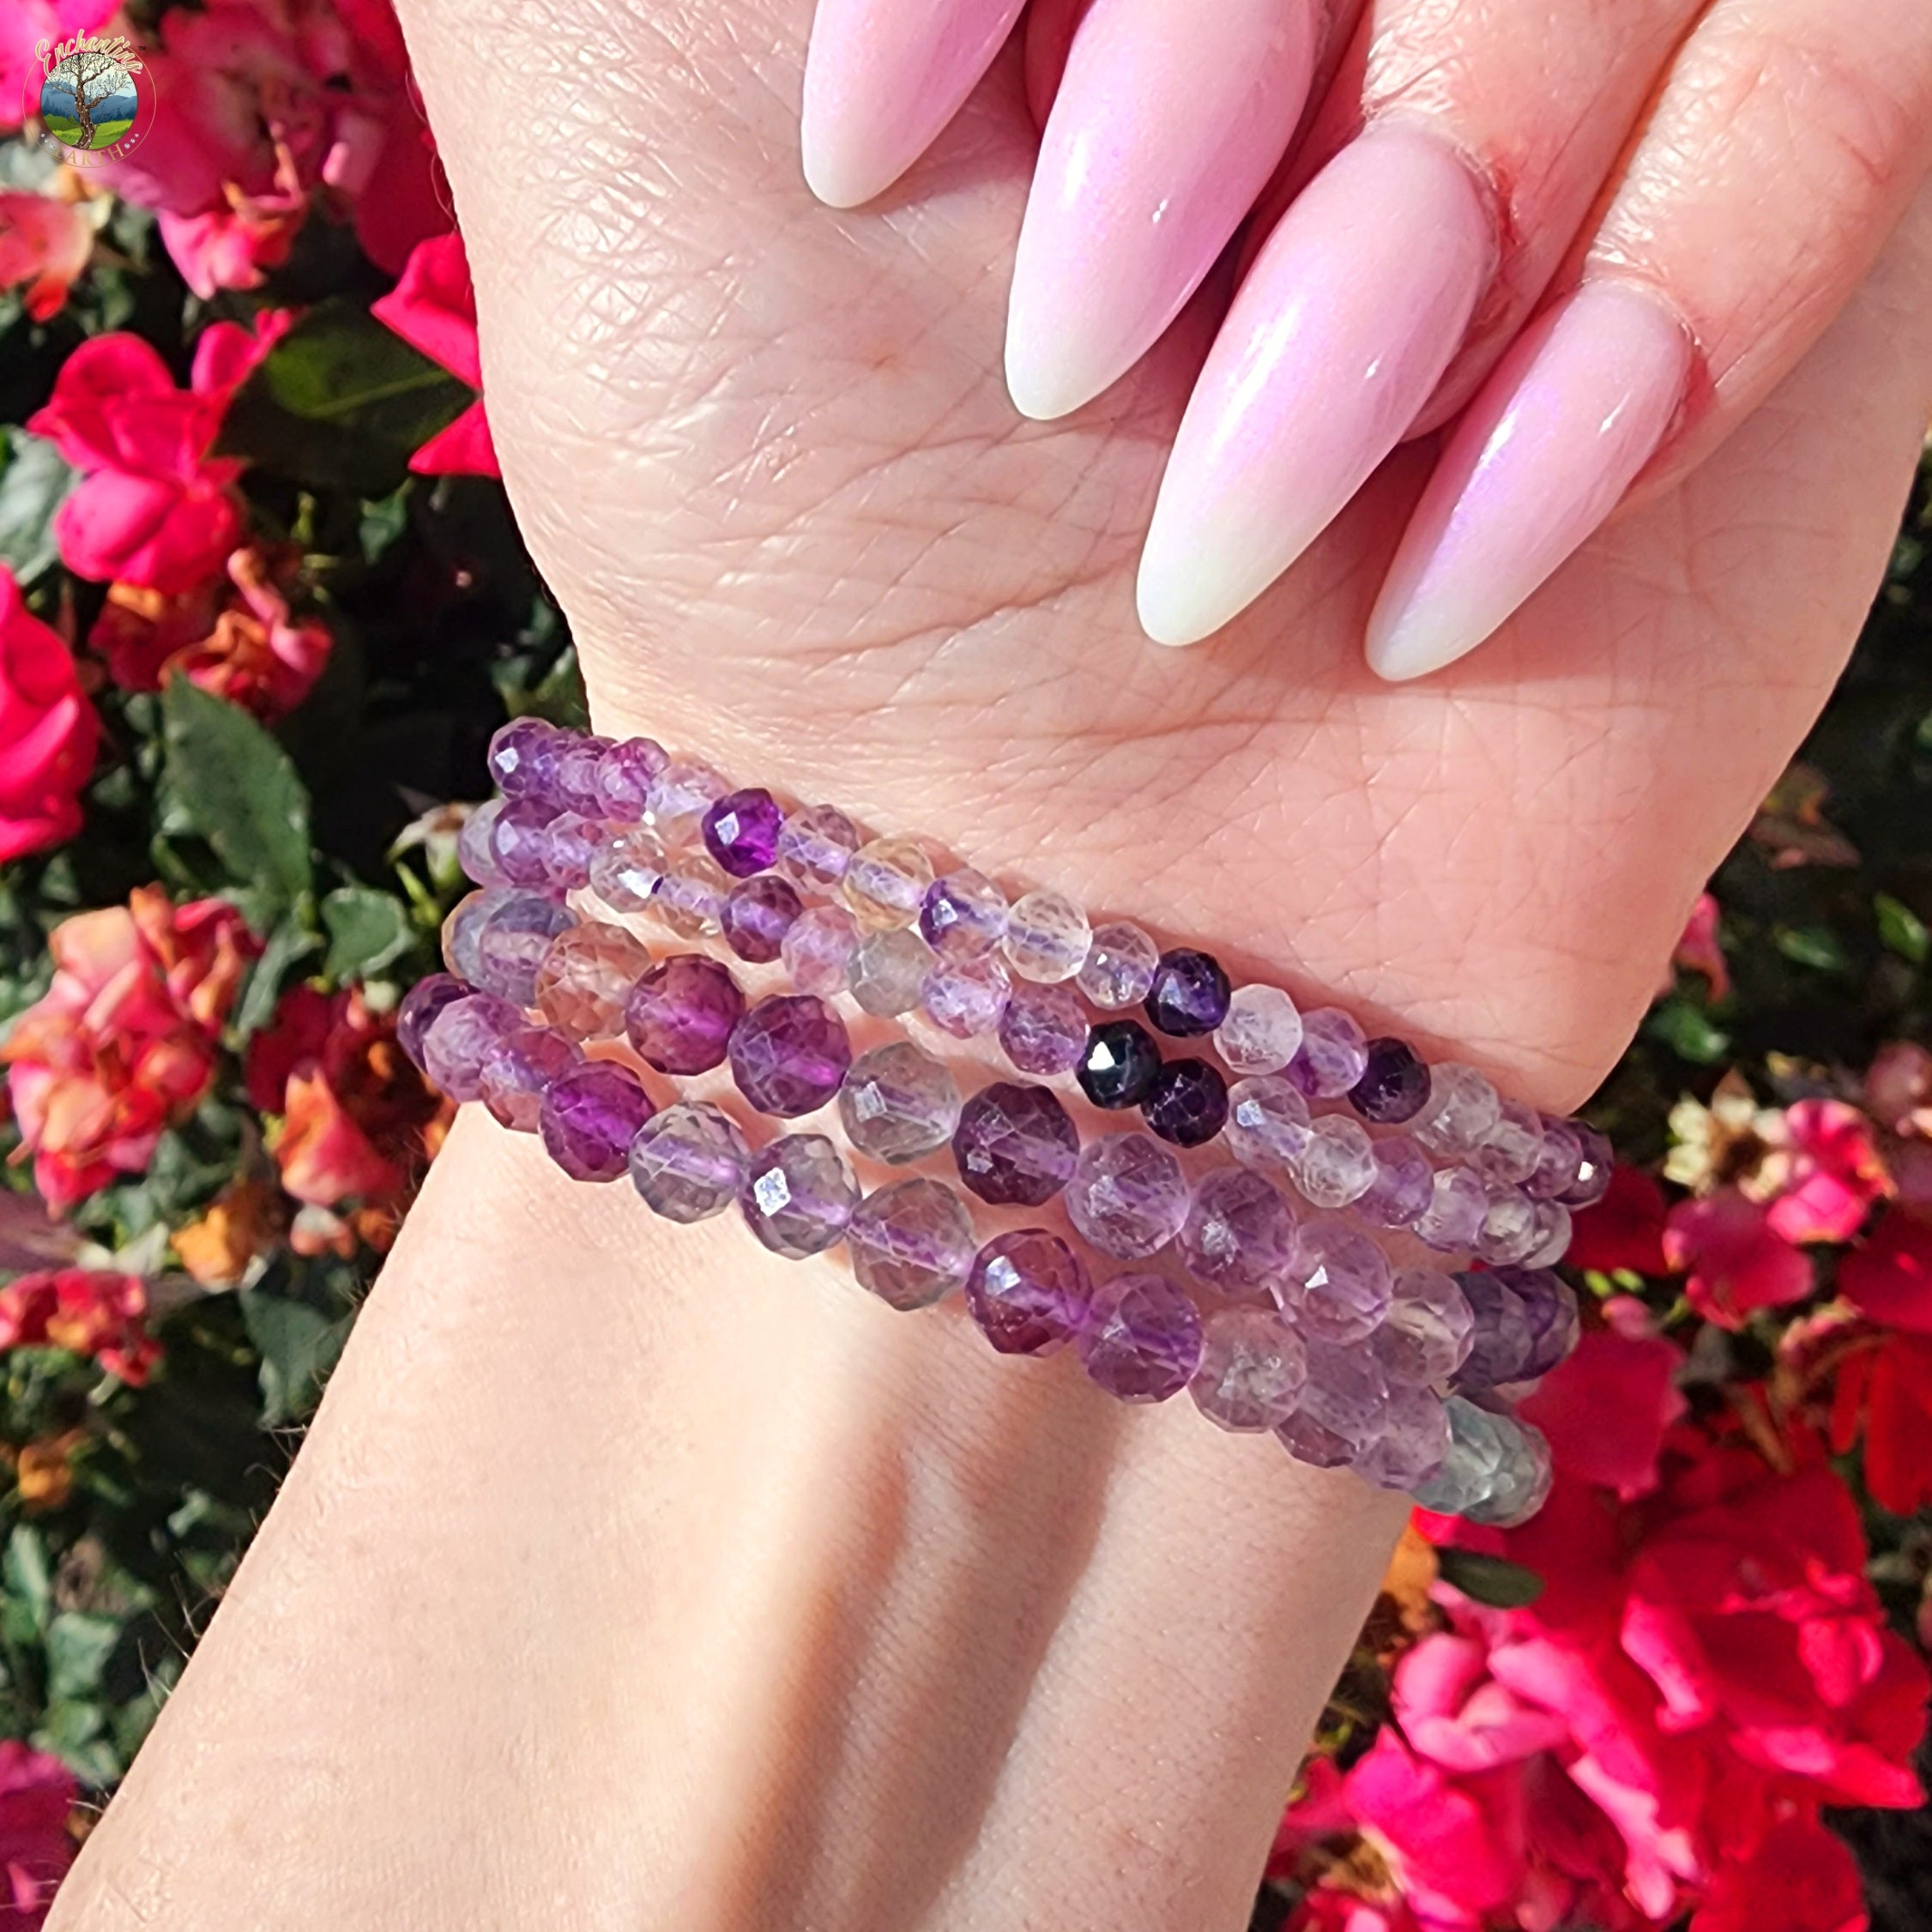 Rainbow Fluorite Faceted Bracelet for Clarity, Focus and Memorization